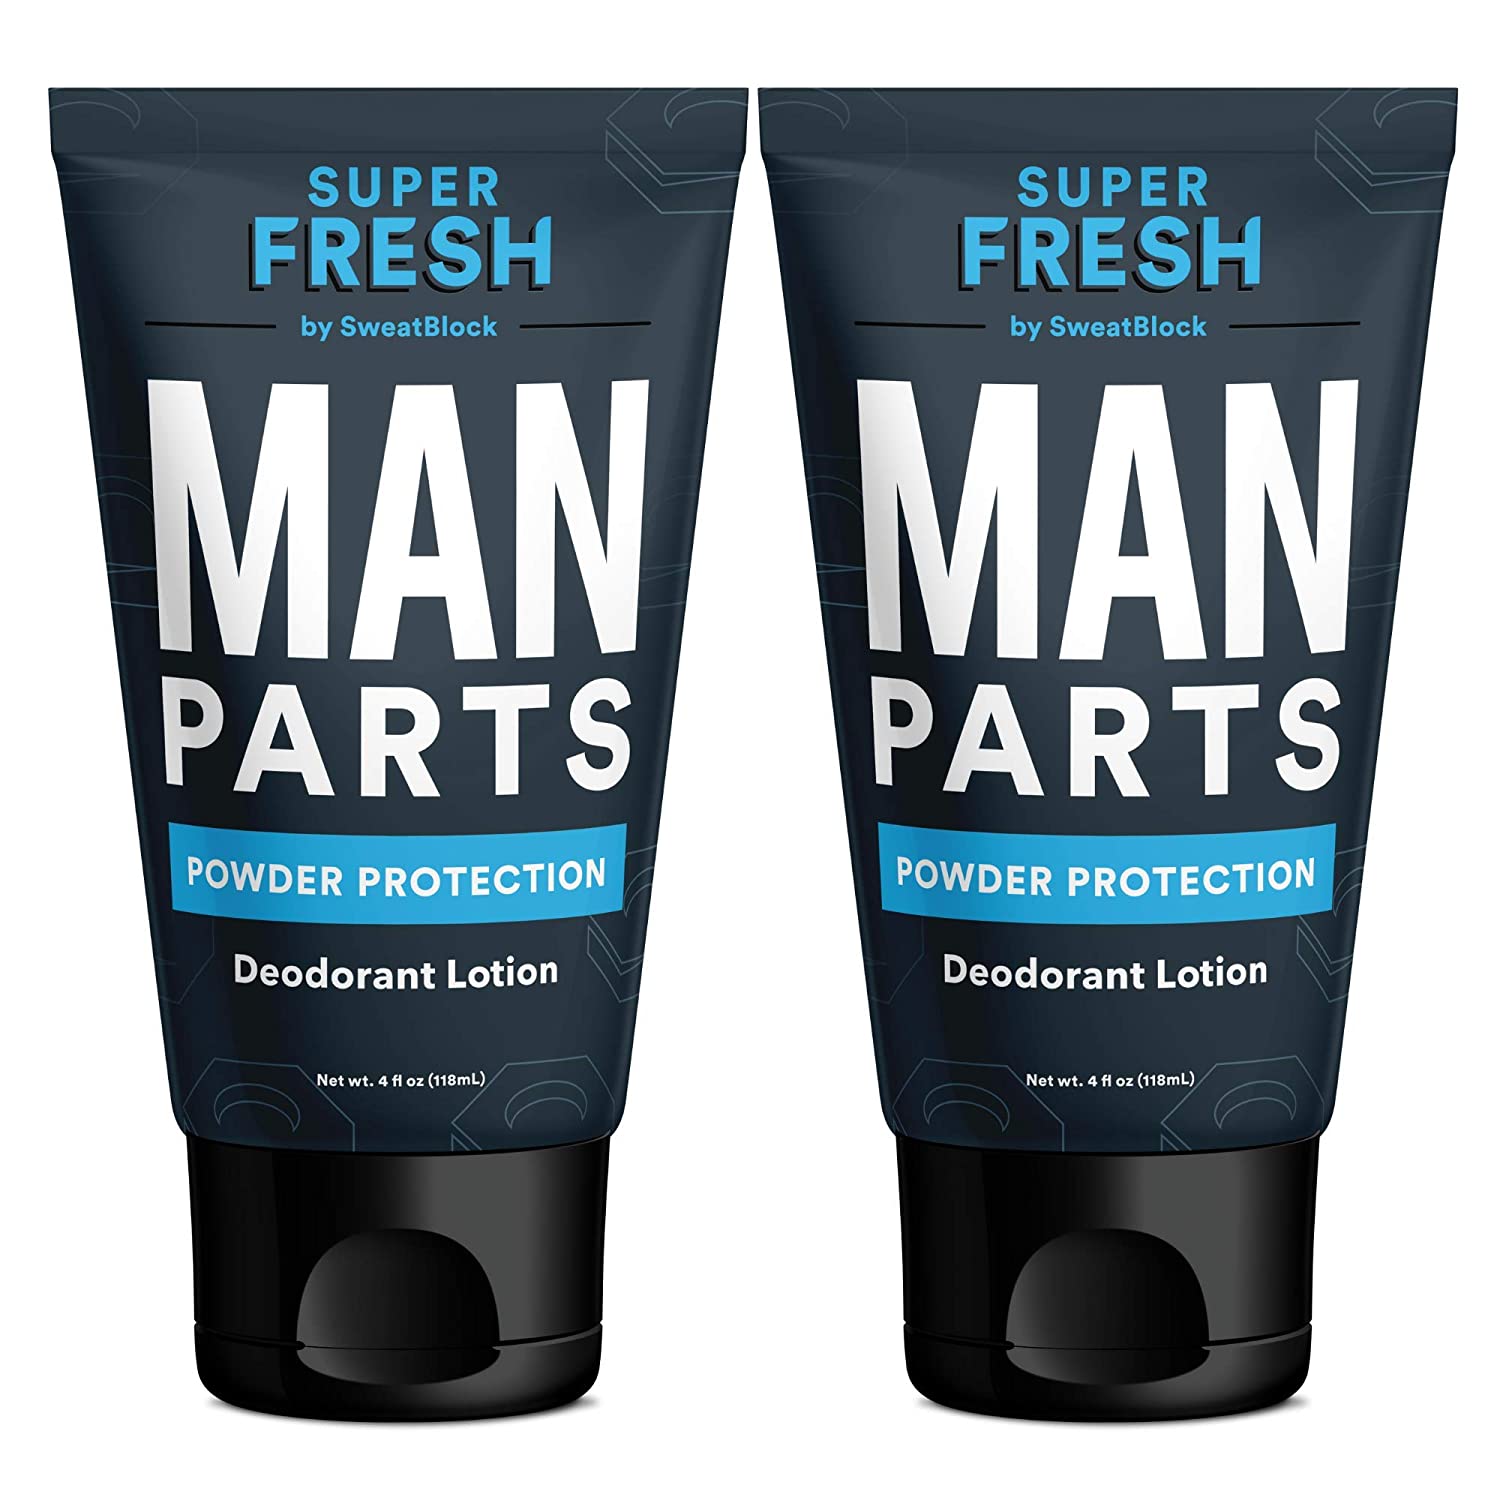 Super Fresh Man Parts Ball Deodorant For Men - 2-in-1 Deodorant & Powder Lotion that Deodorizes and Stops Sticky, Itchy, Smelly Man Parts - Aluminum Free, No Talc, No Parabens - Dermatologist Tested - Made in USA - 4 fl oz Tube (2 Pack)